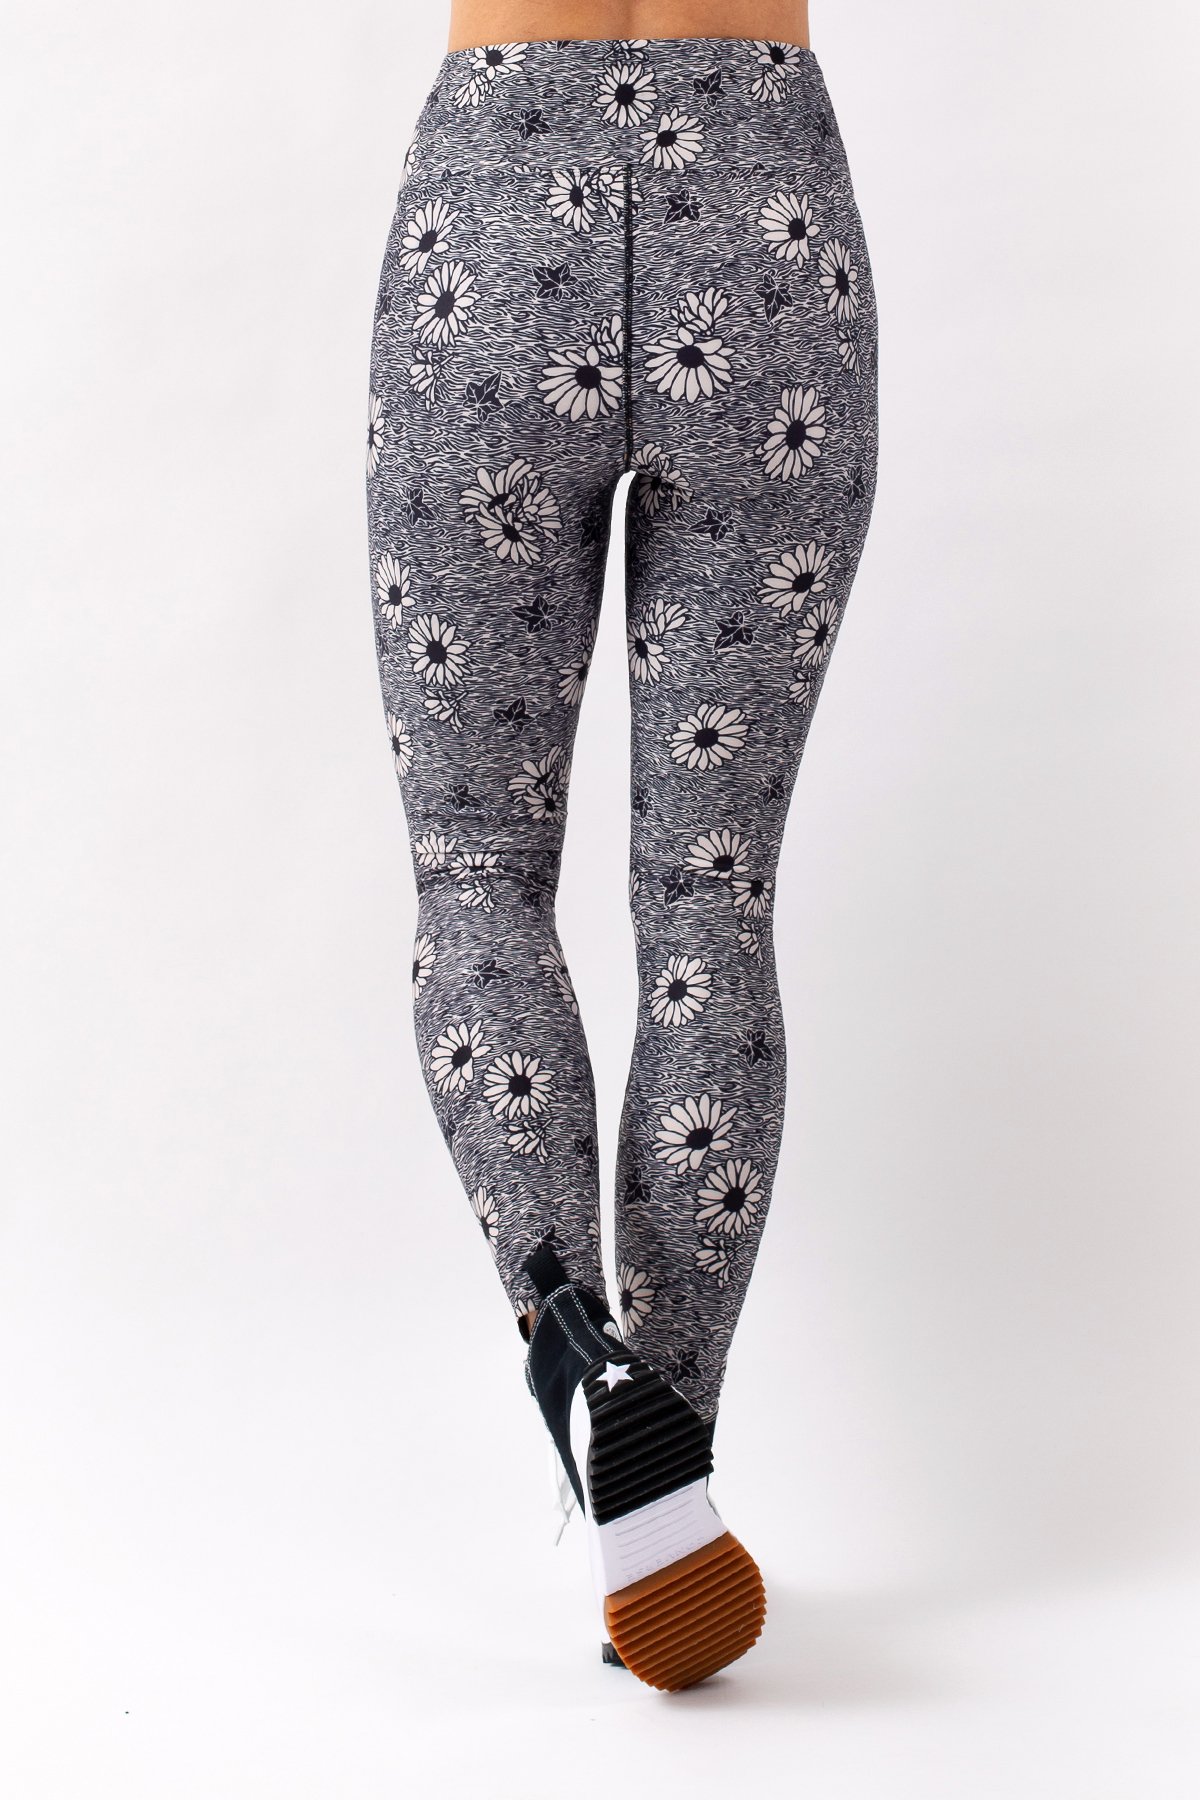 Icecold Tights - Ivy Blossom | XXL